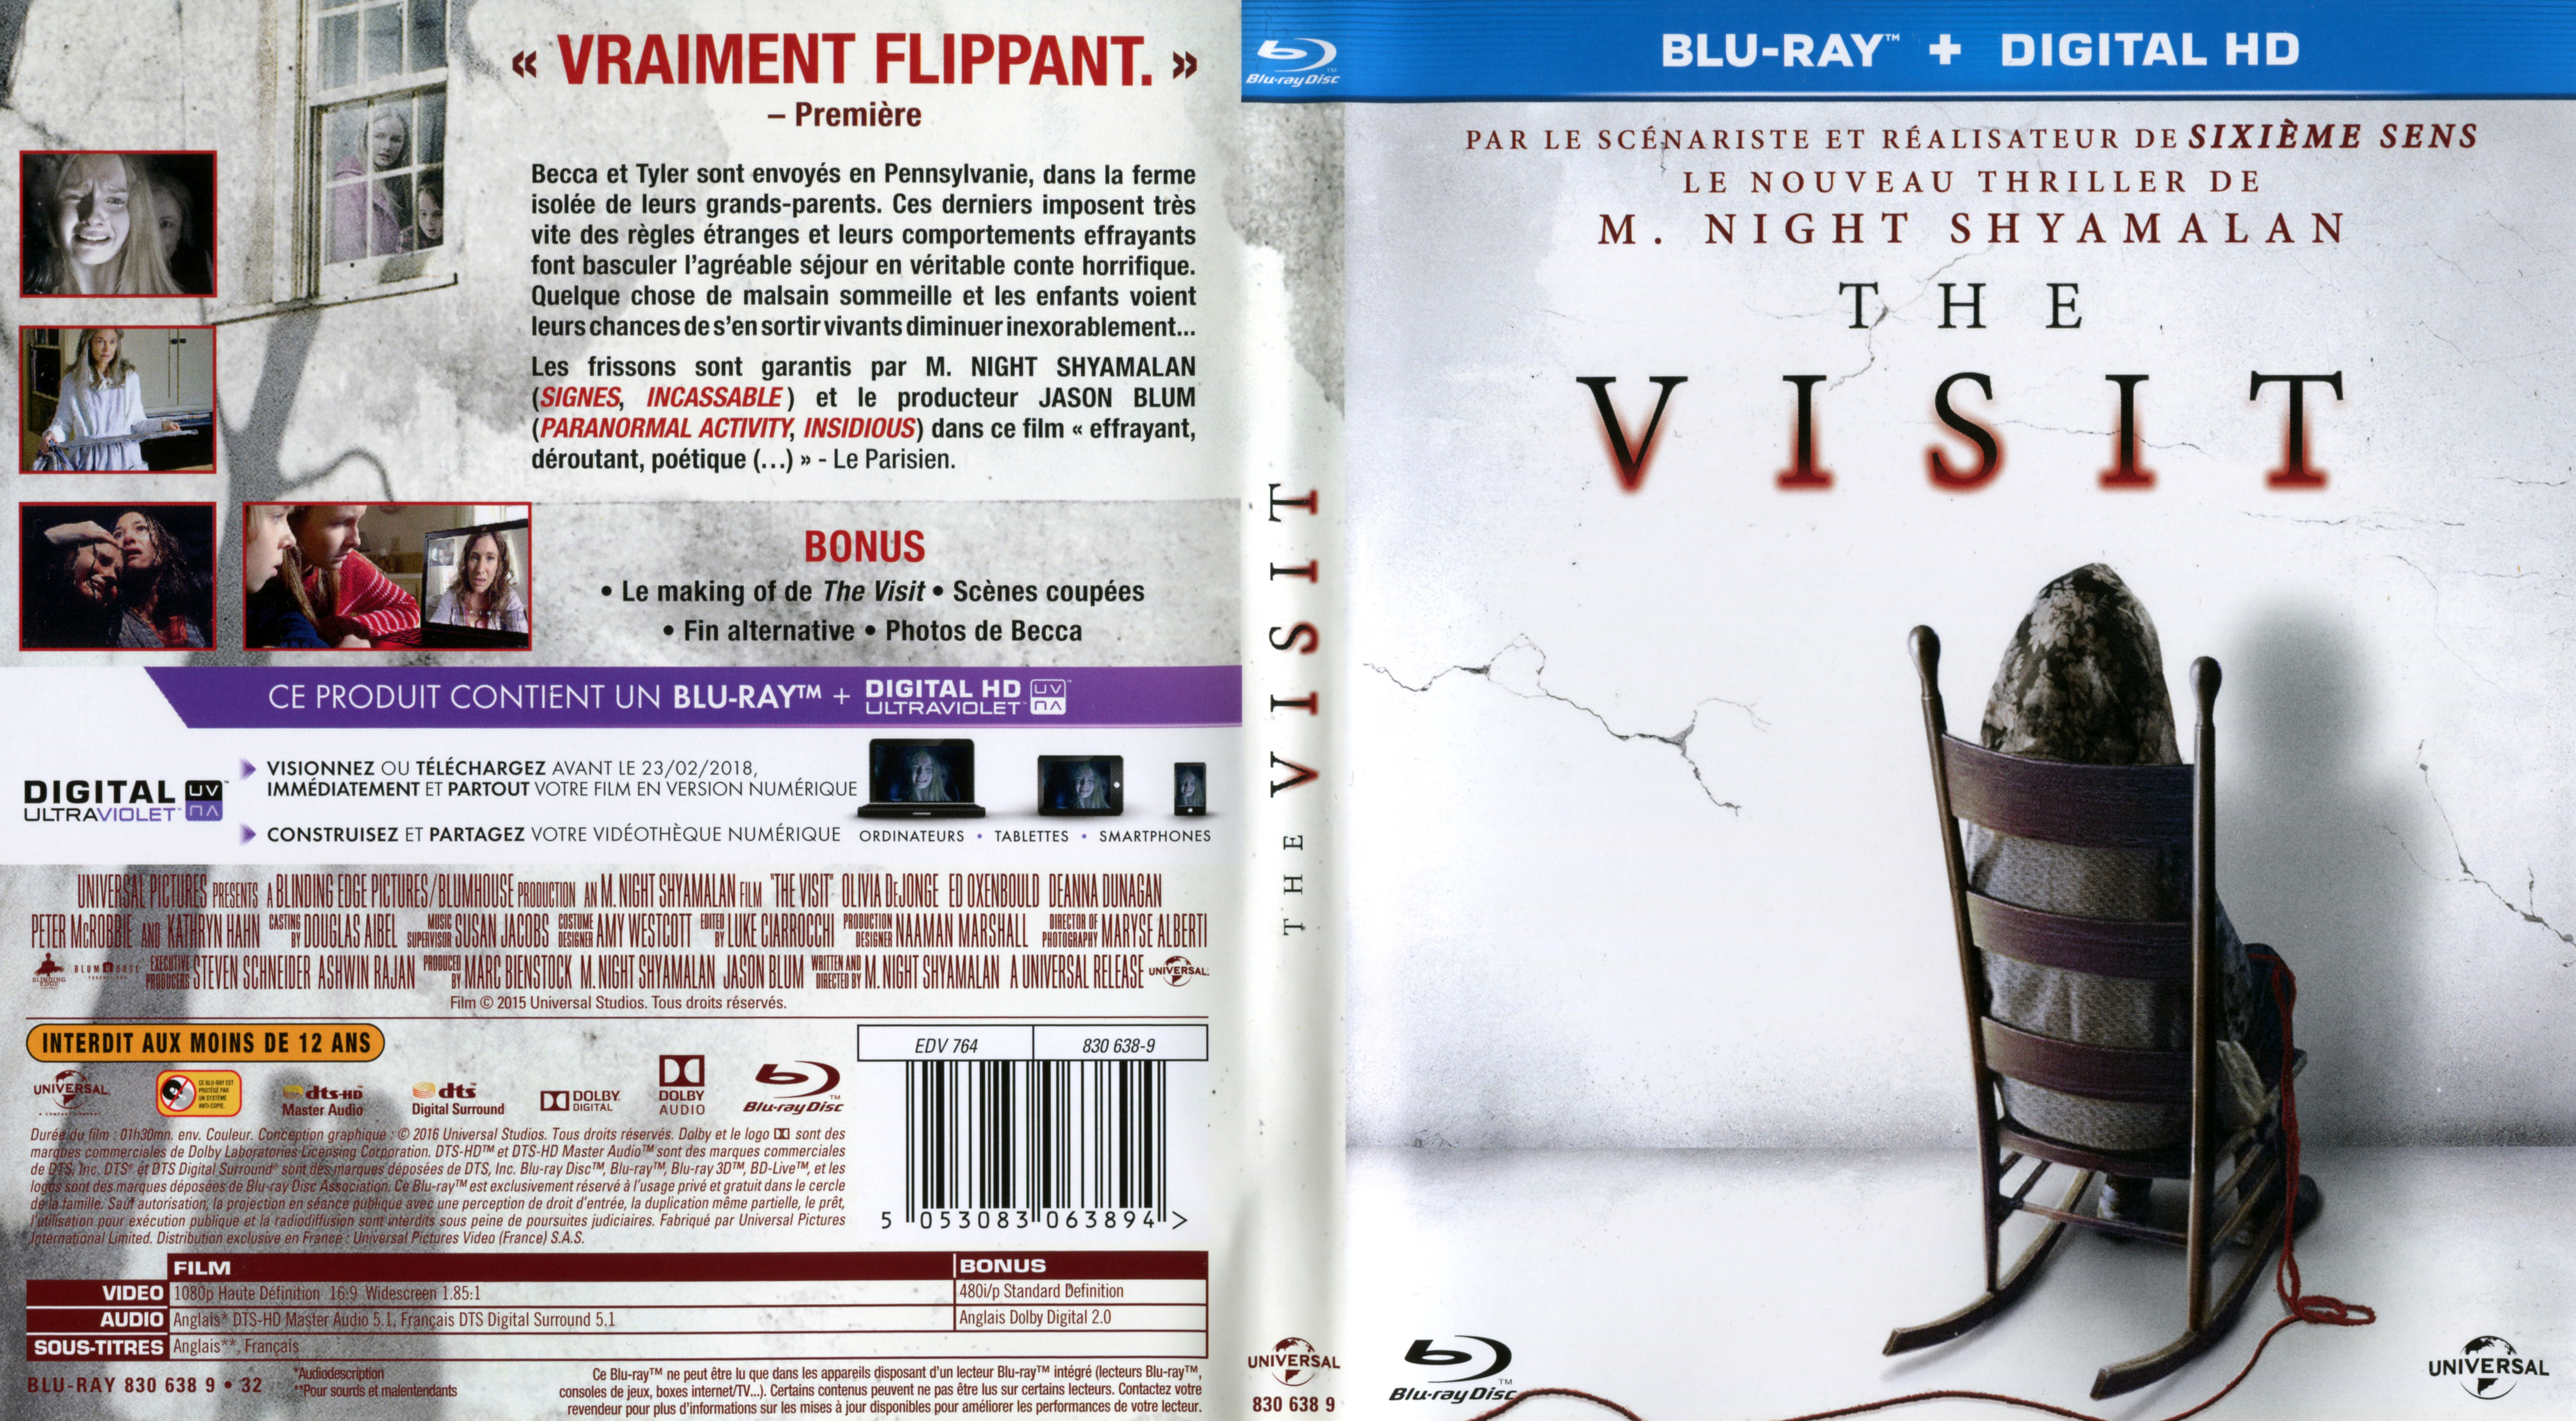 Jaquette DVD The visit (BLU-RAY)